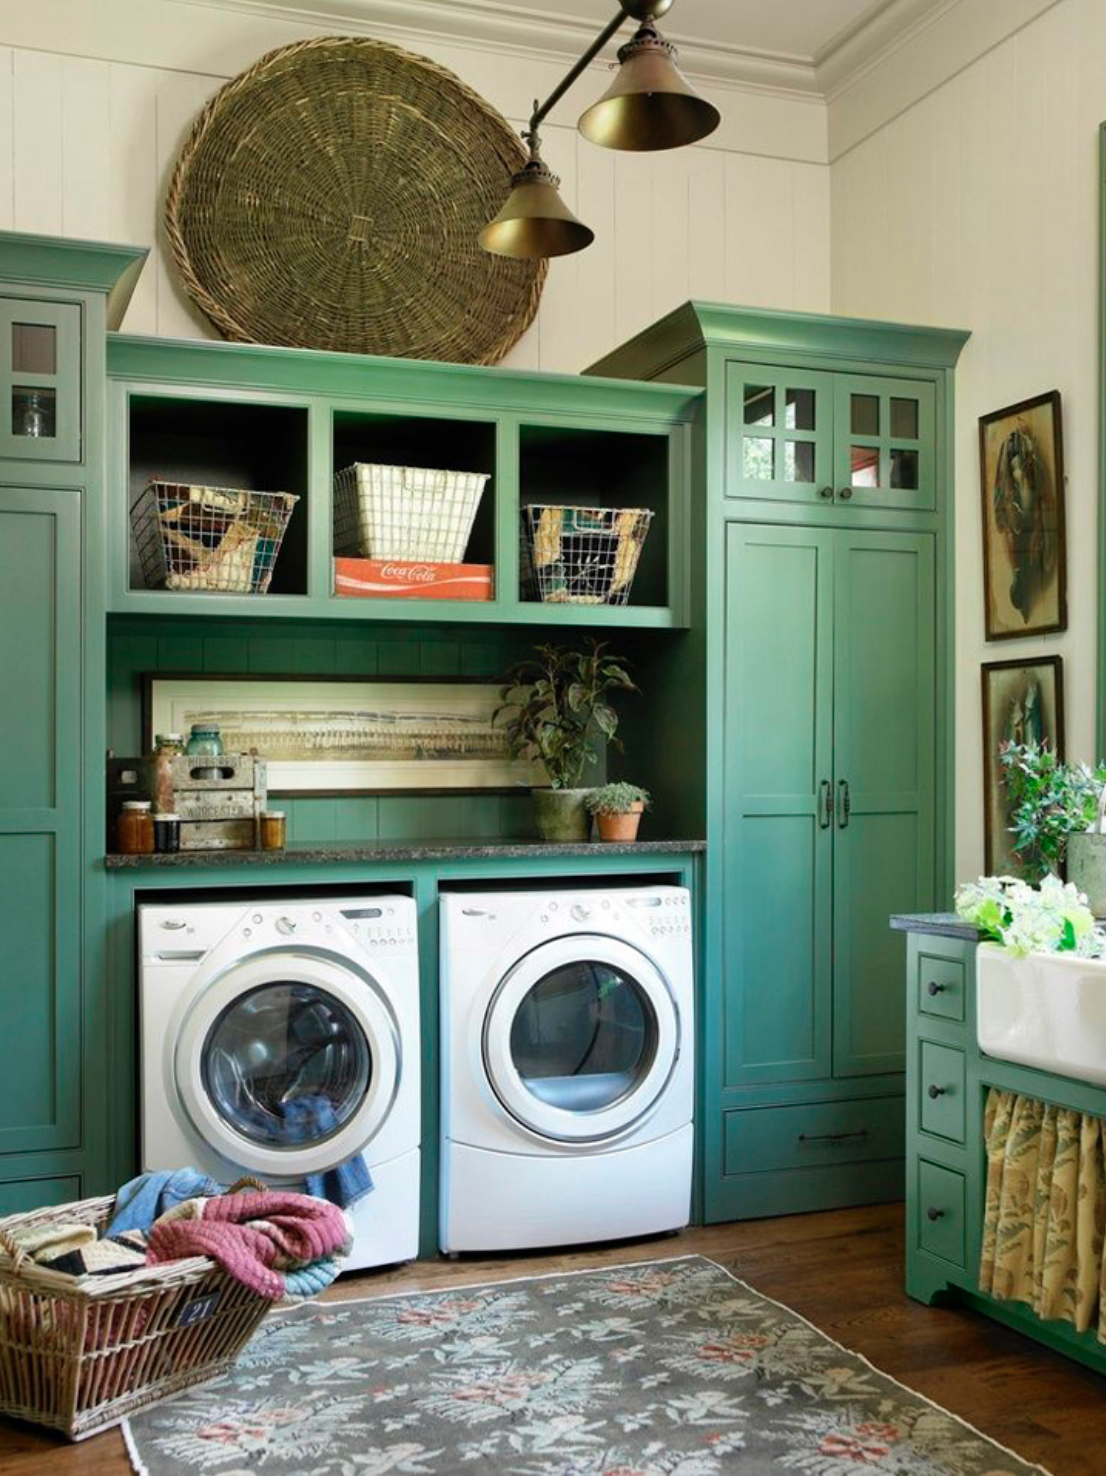 Designing the Perfect Laundry Room